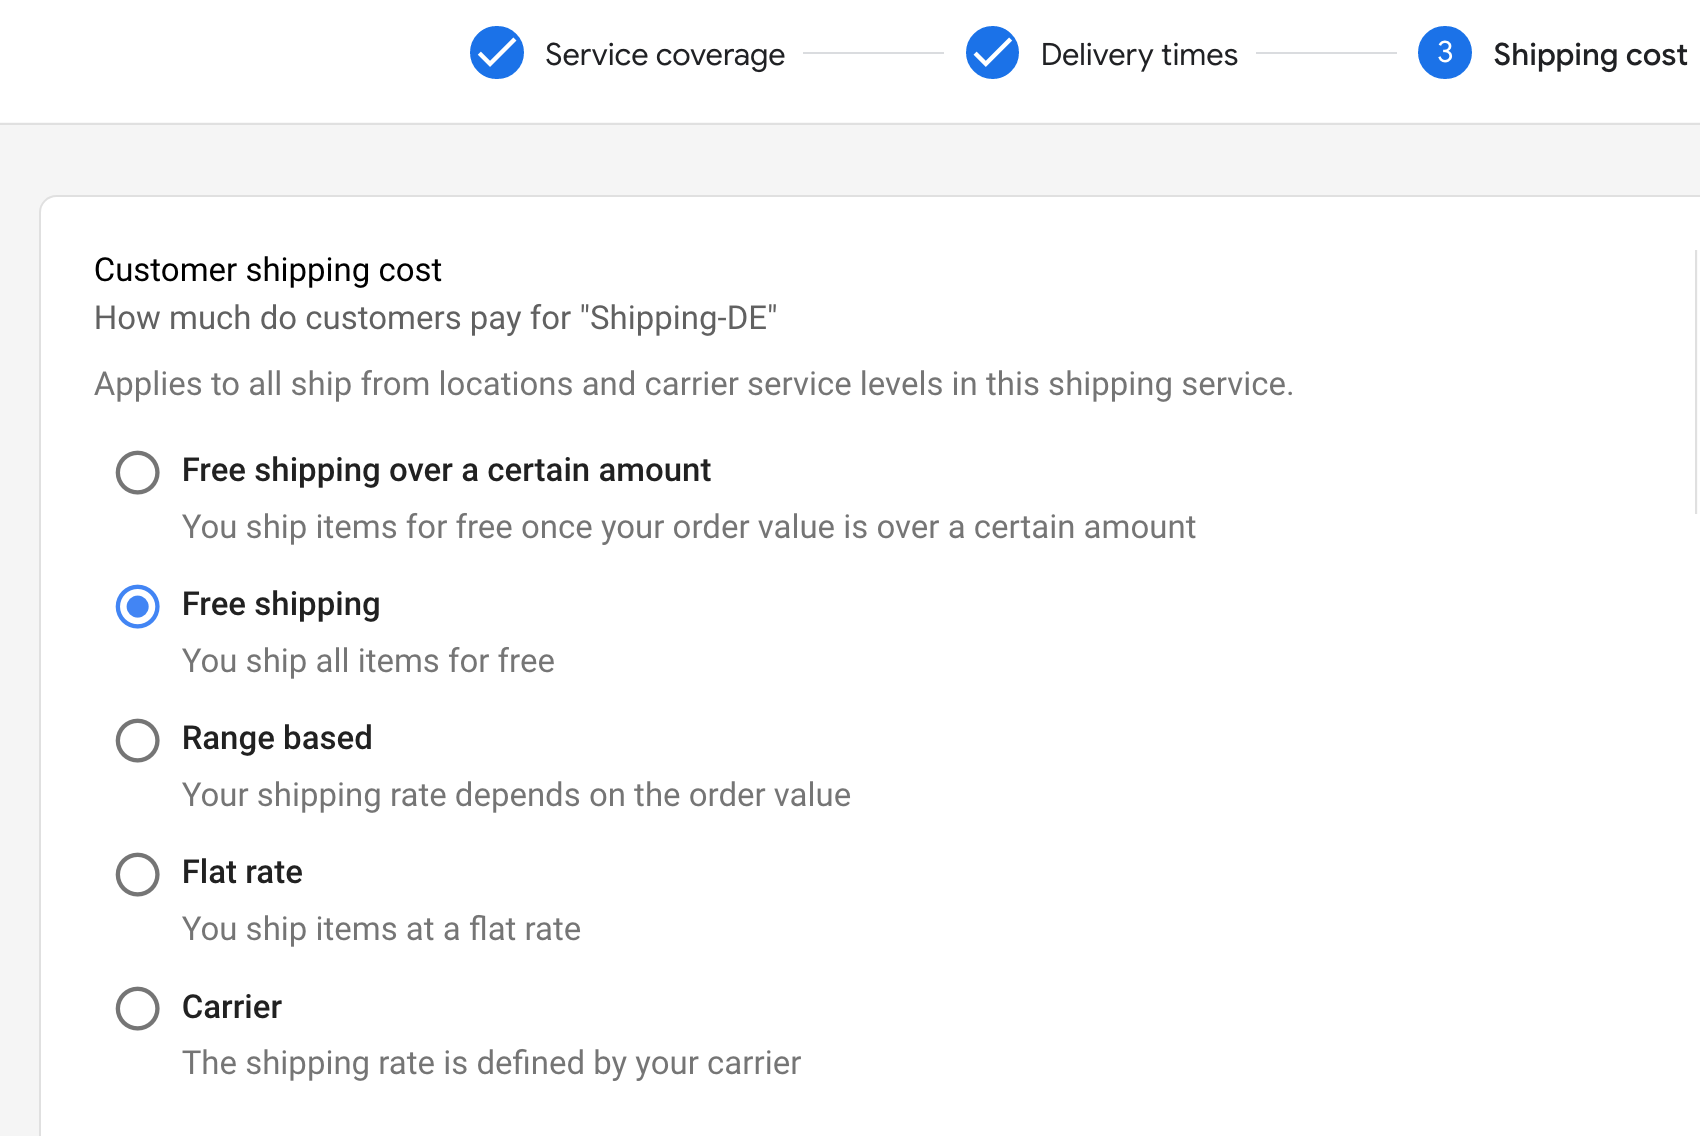 Customer shipping cost section free shipping